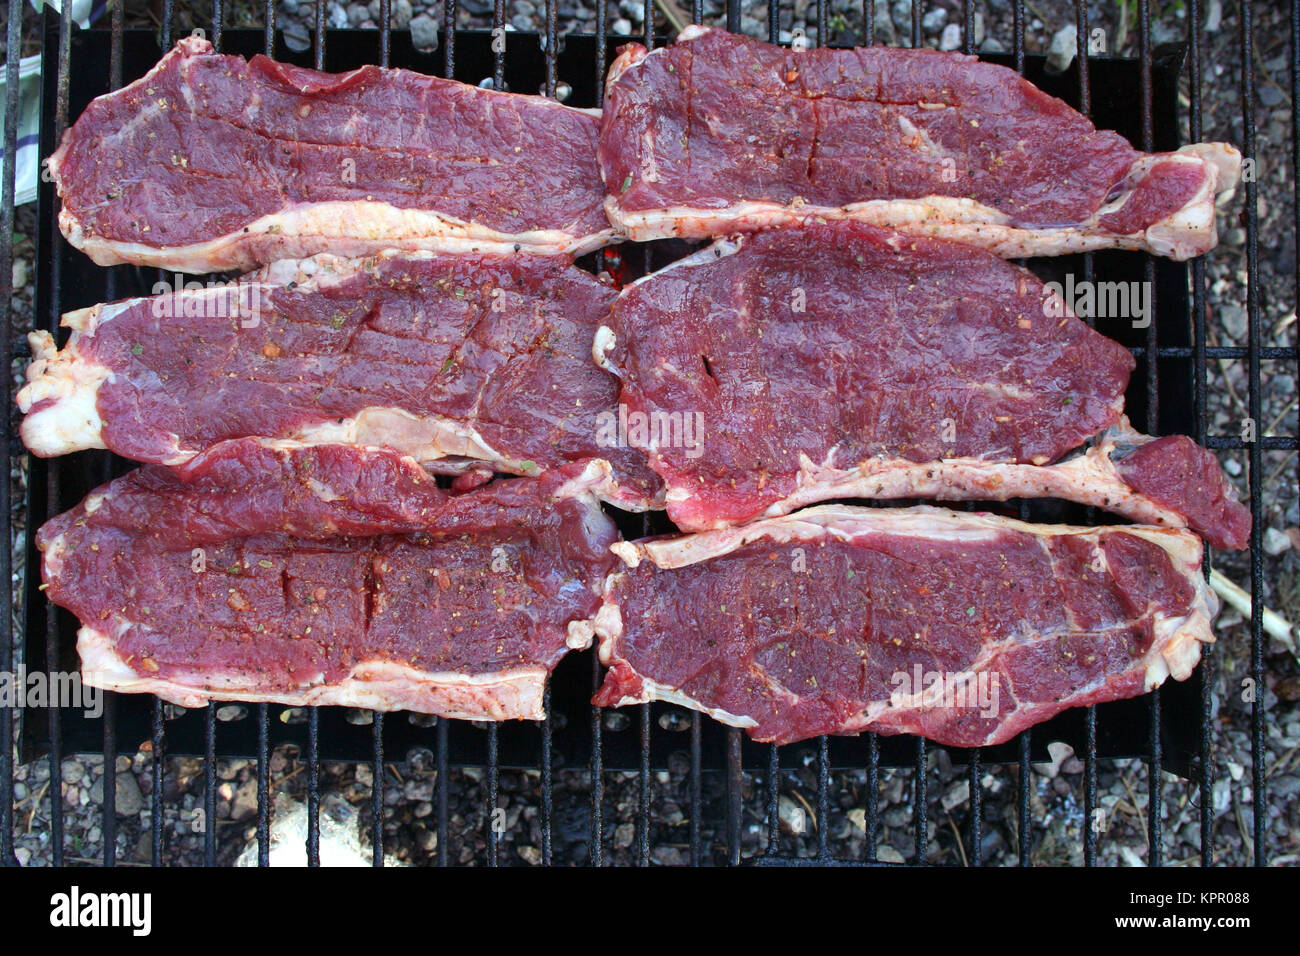 meat on grill Stock Photo